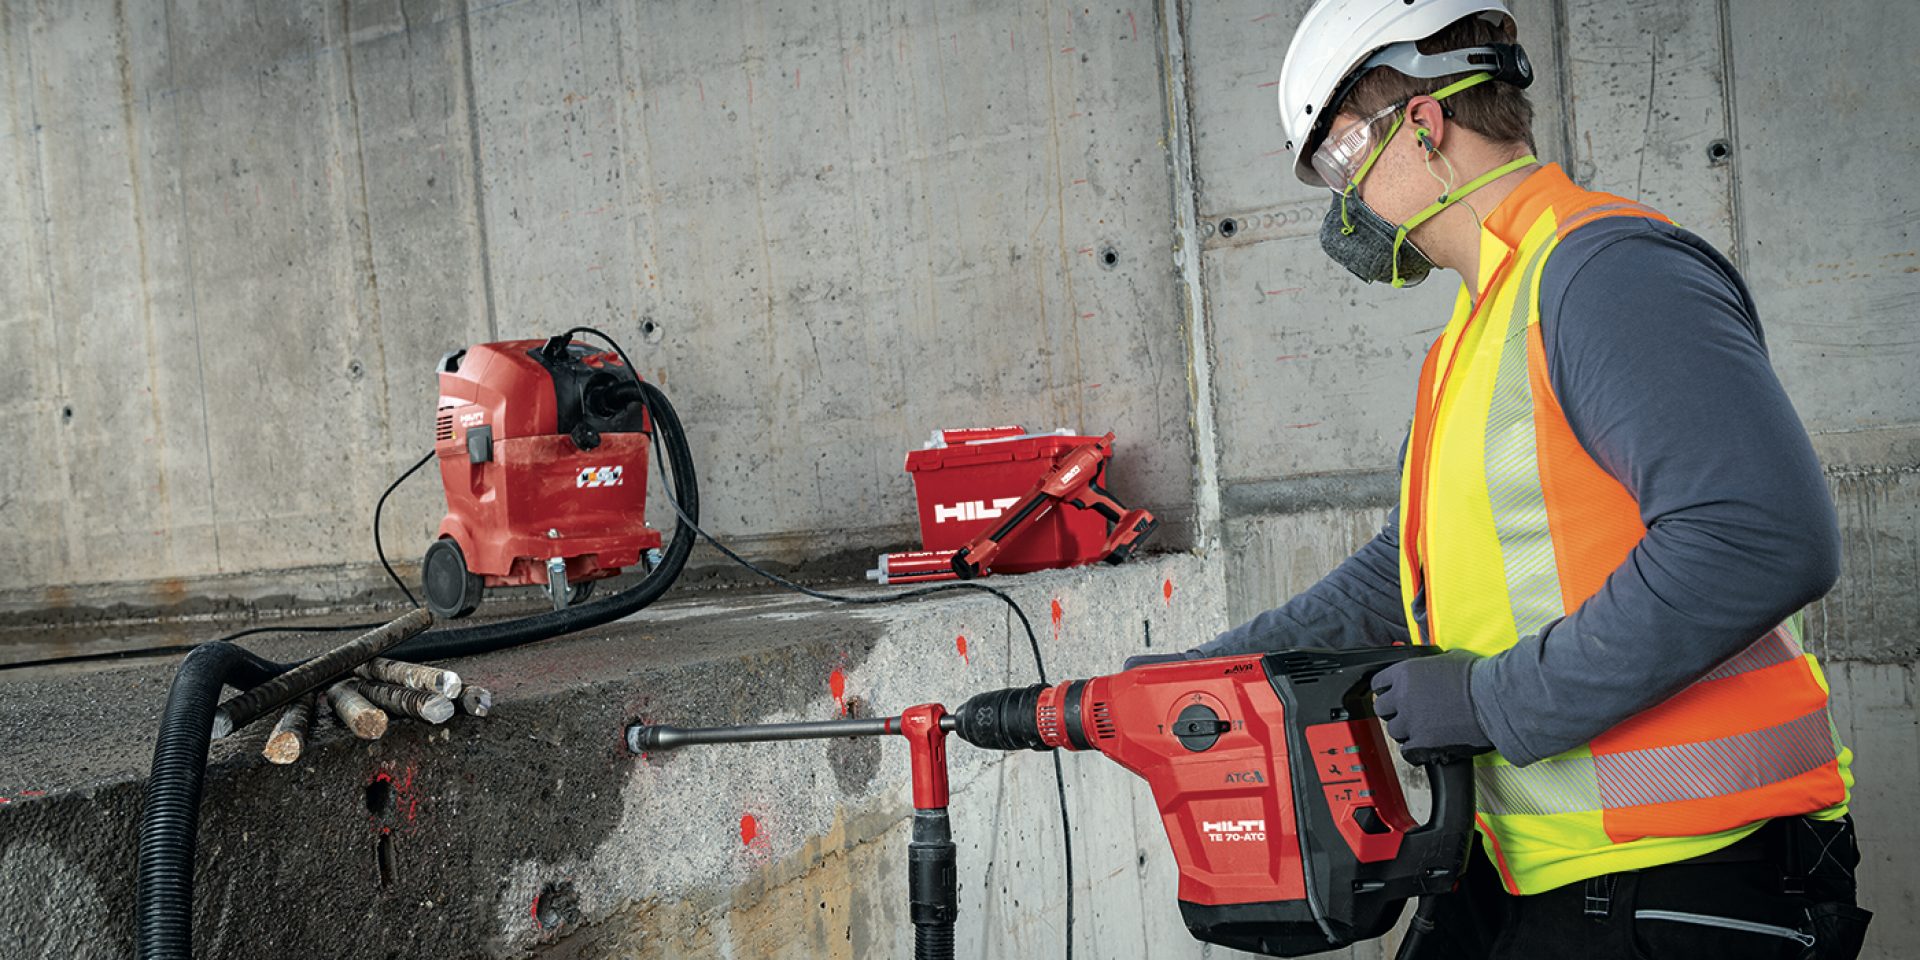 Hilti solutions to jobsite application